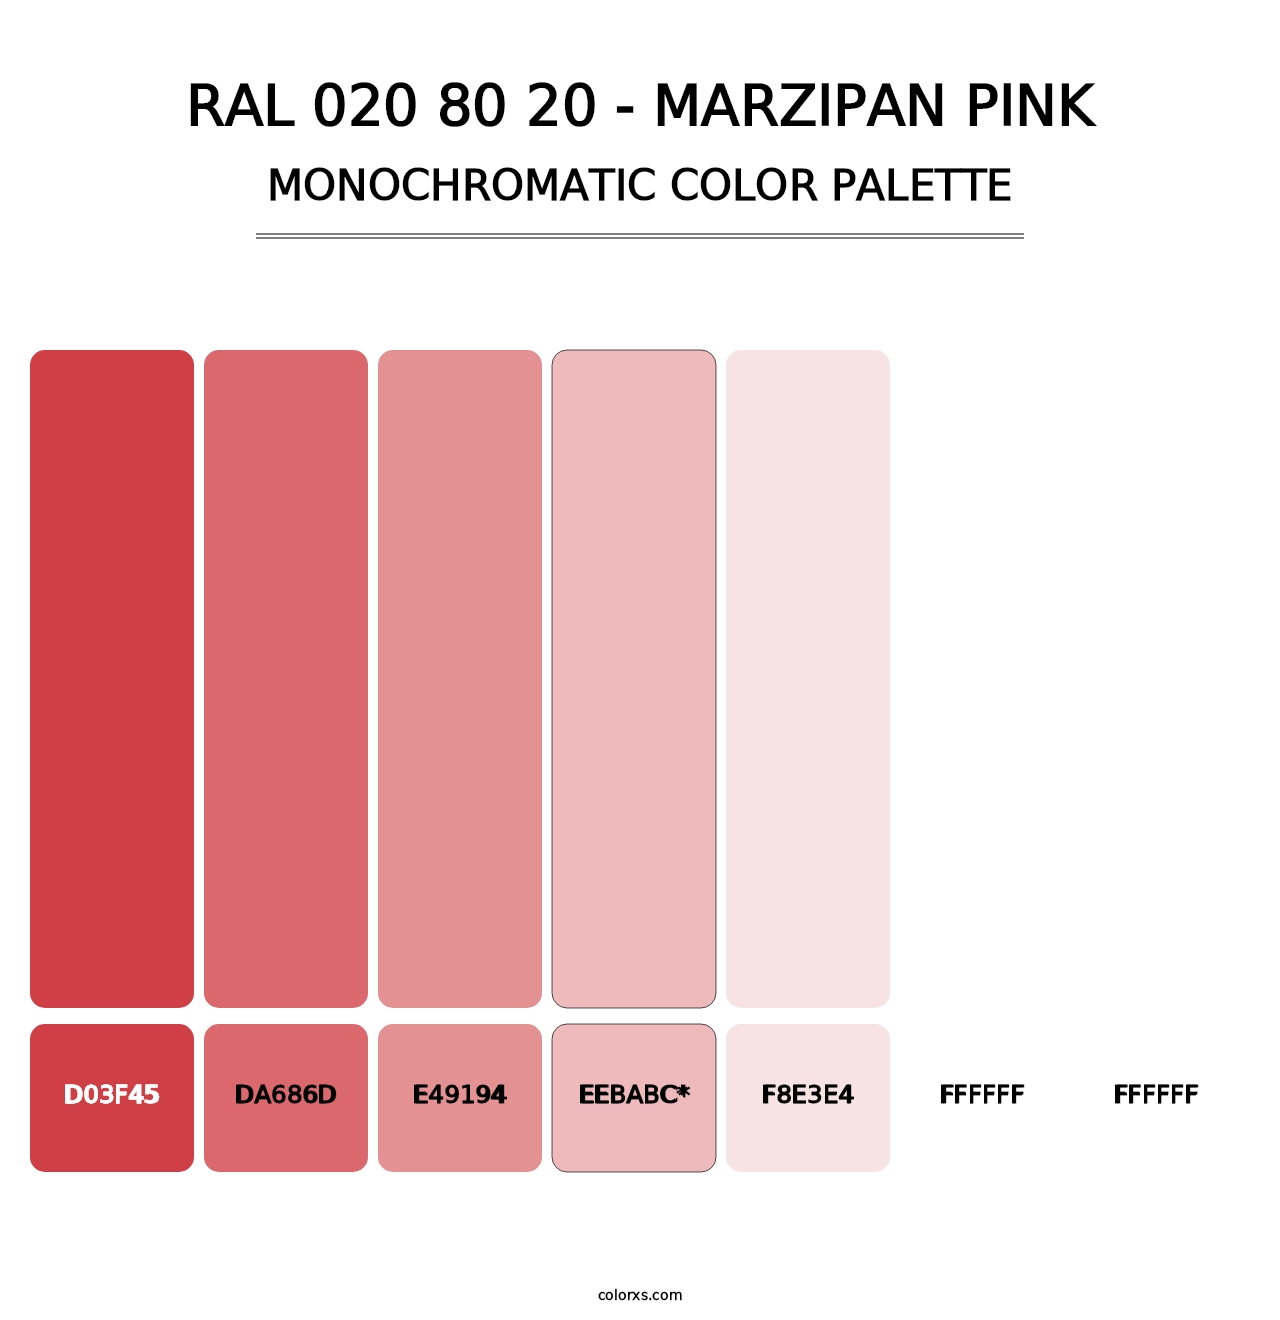 RAL 020 80 20 - Marzipan Pink - Monochromatic Color Palette